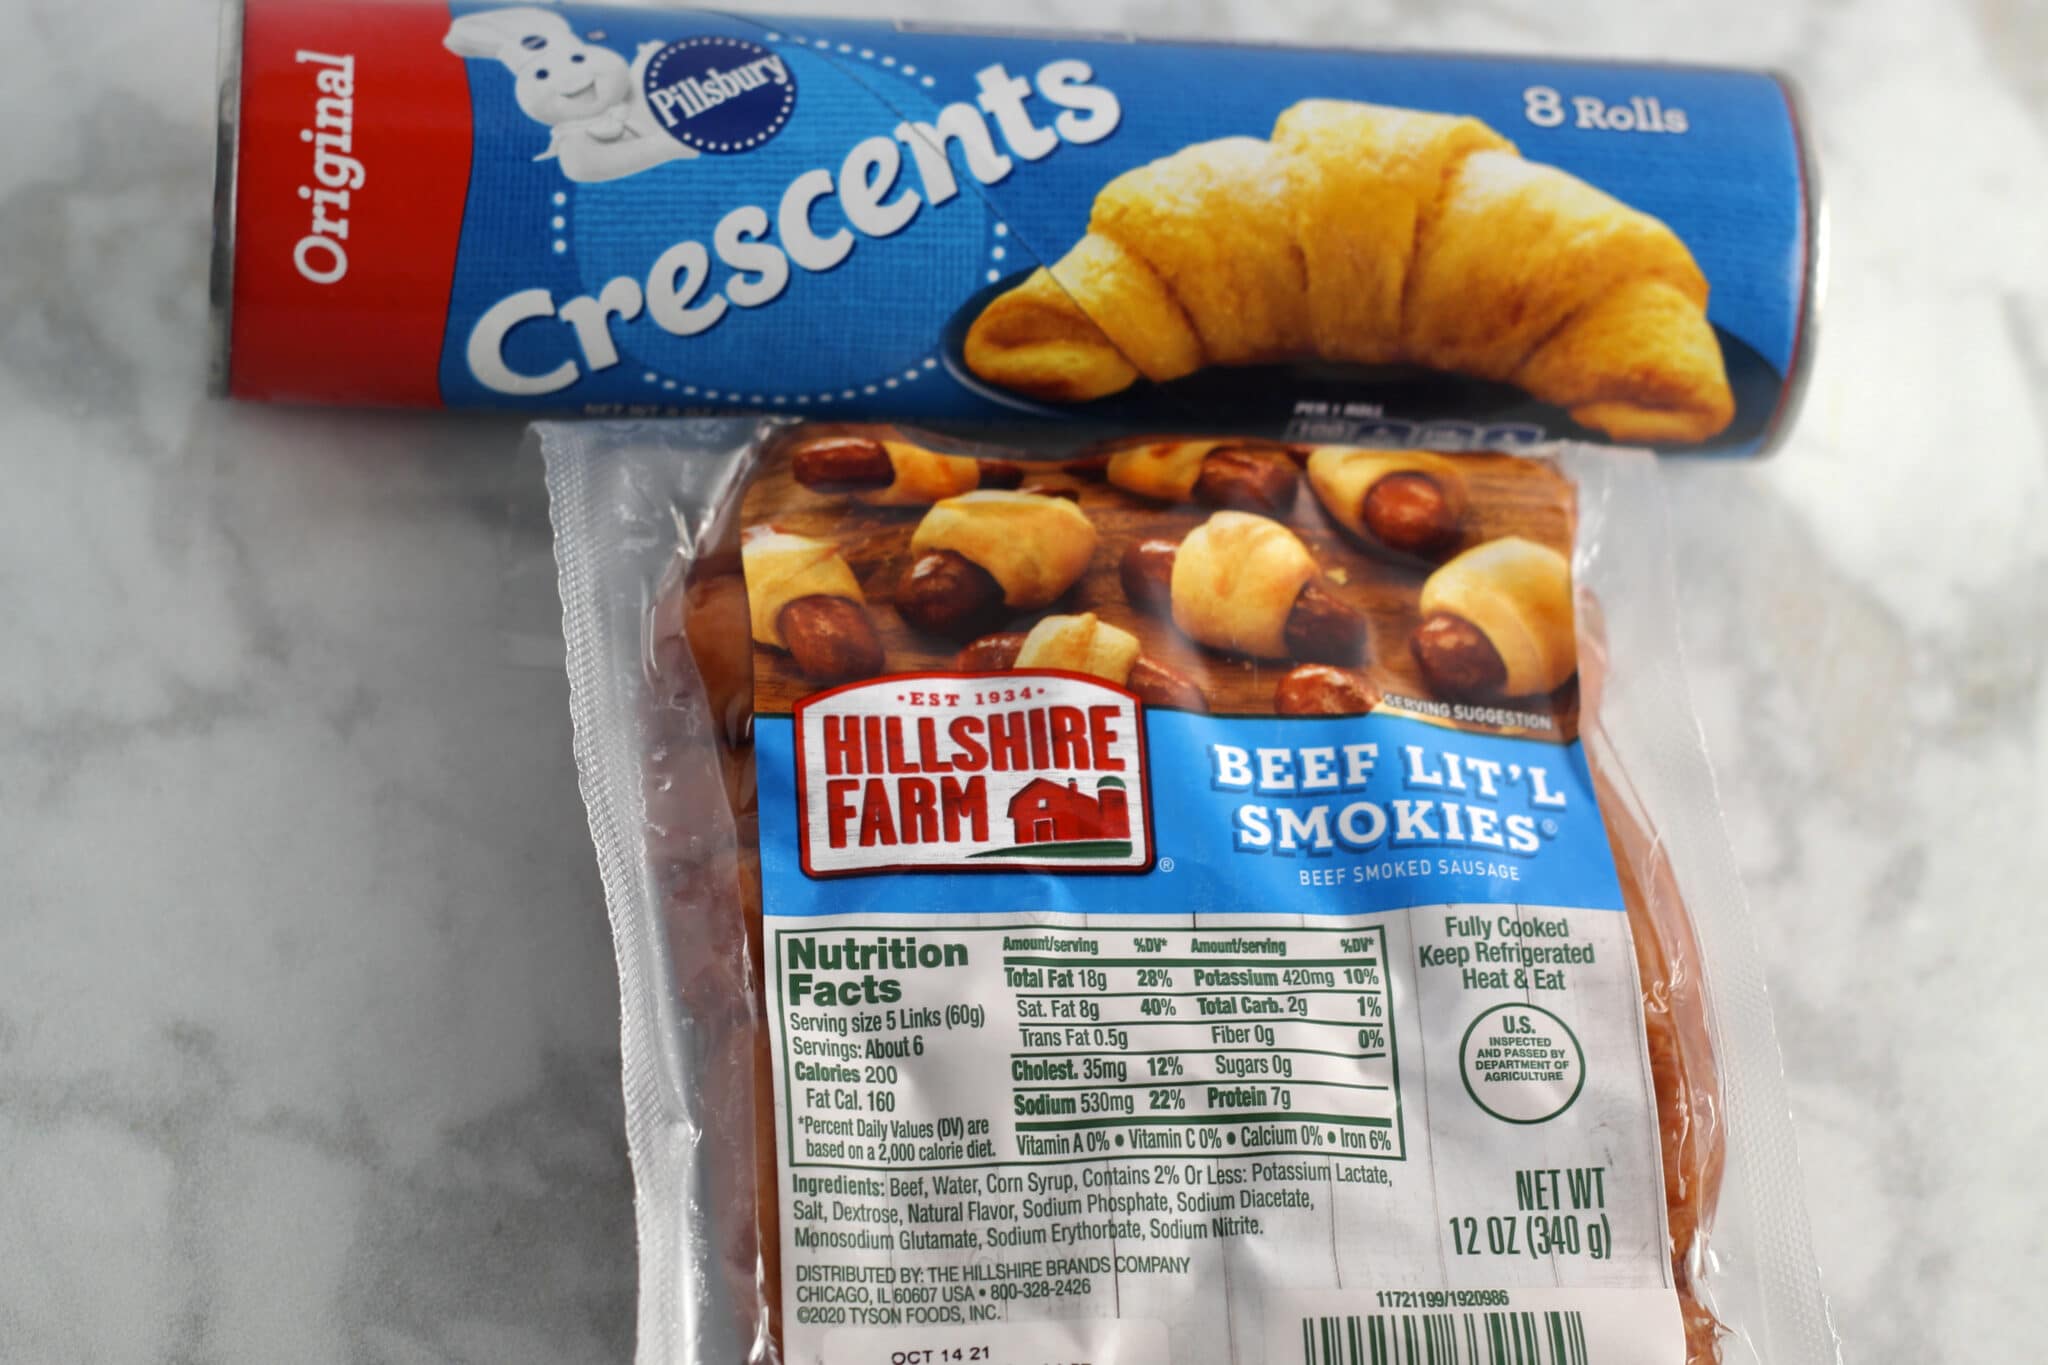 ingredients for pigs in a blanket are lil Smokies and crescent rolls